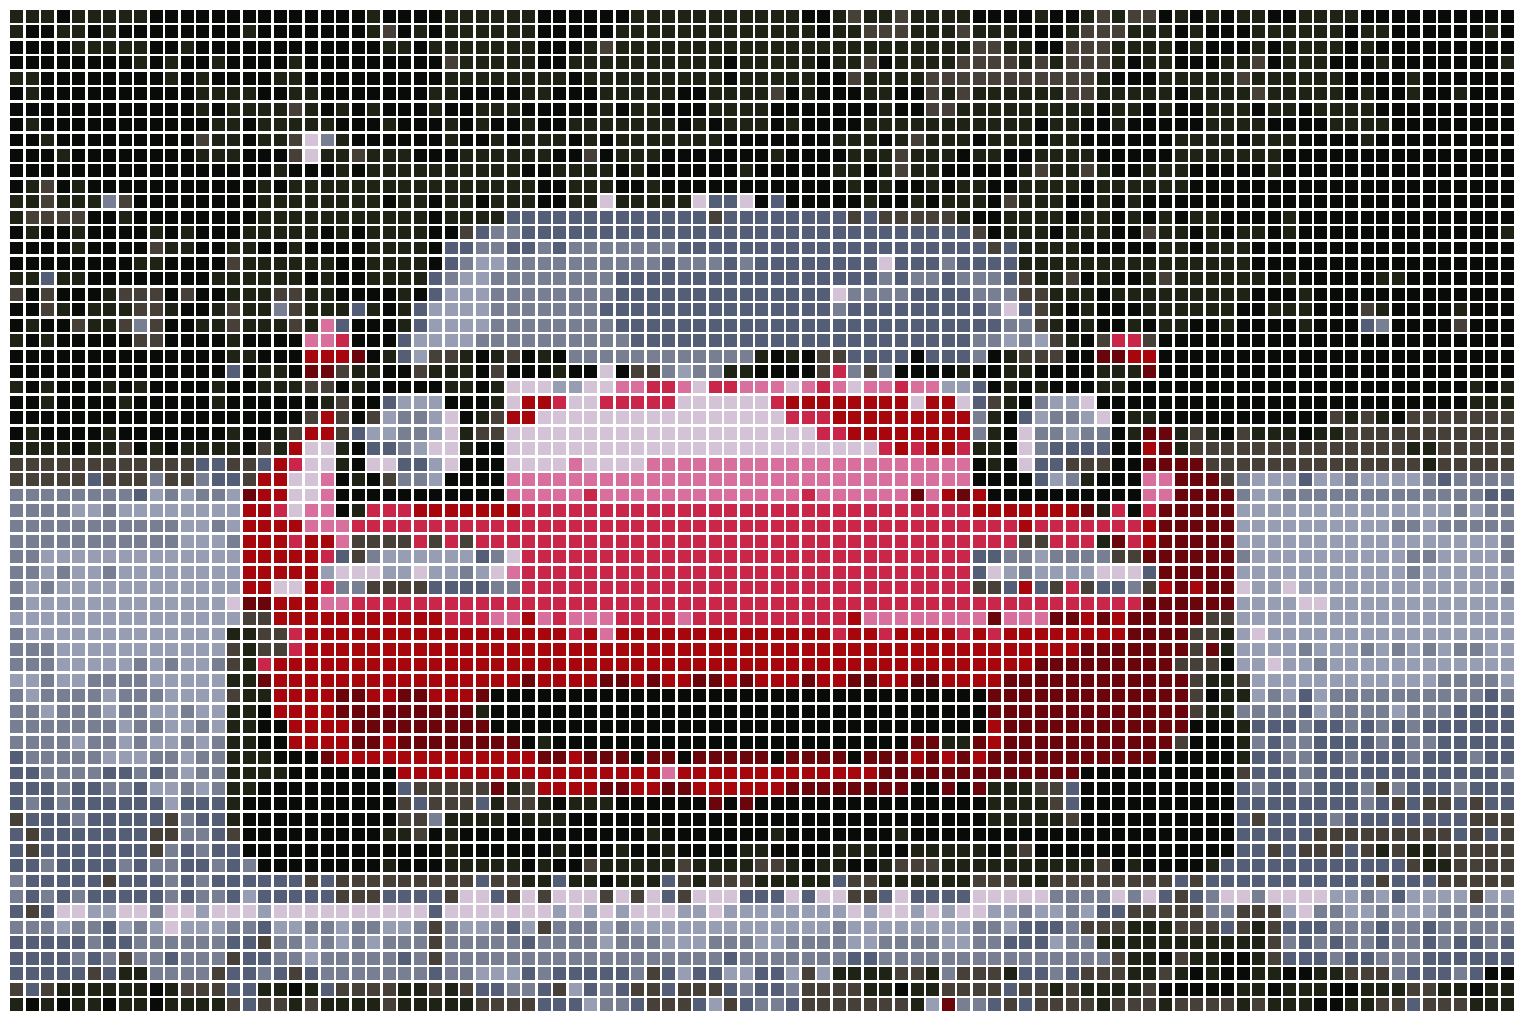 pixelated Miata with ch clustering